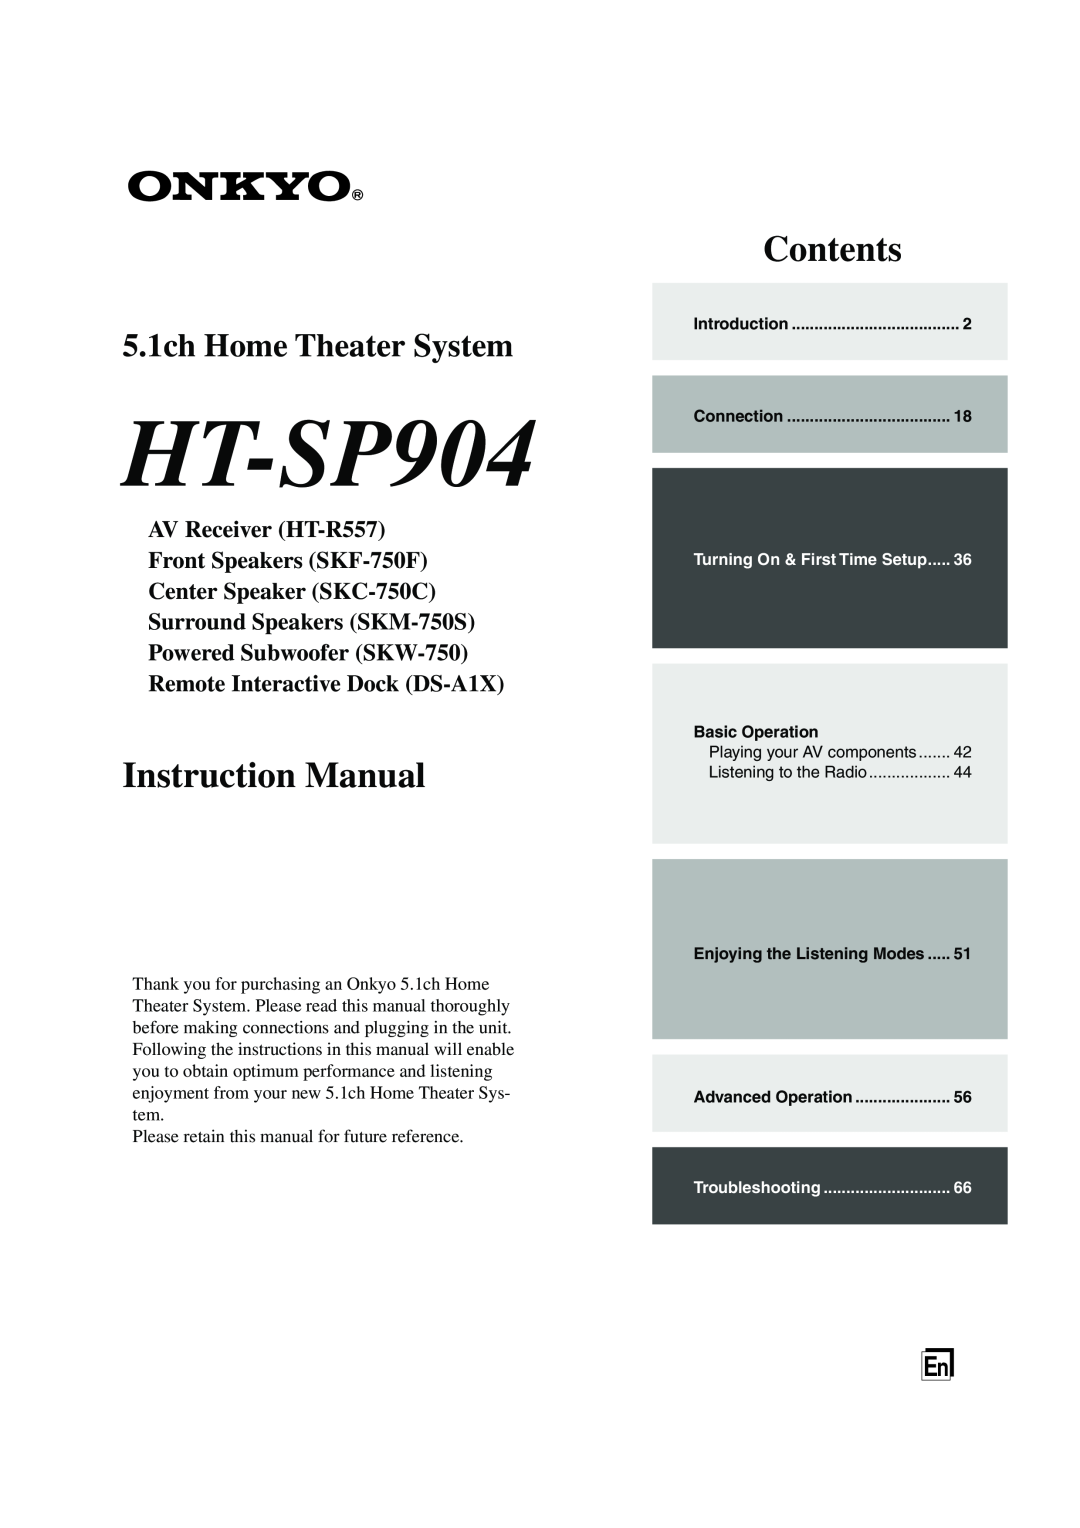 Onkyo HT-SP904 instruction manual Instruction Manual, Contents, 5.1ch Home Theater System, Center Speaker SKC-750C 